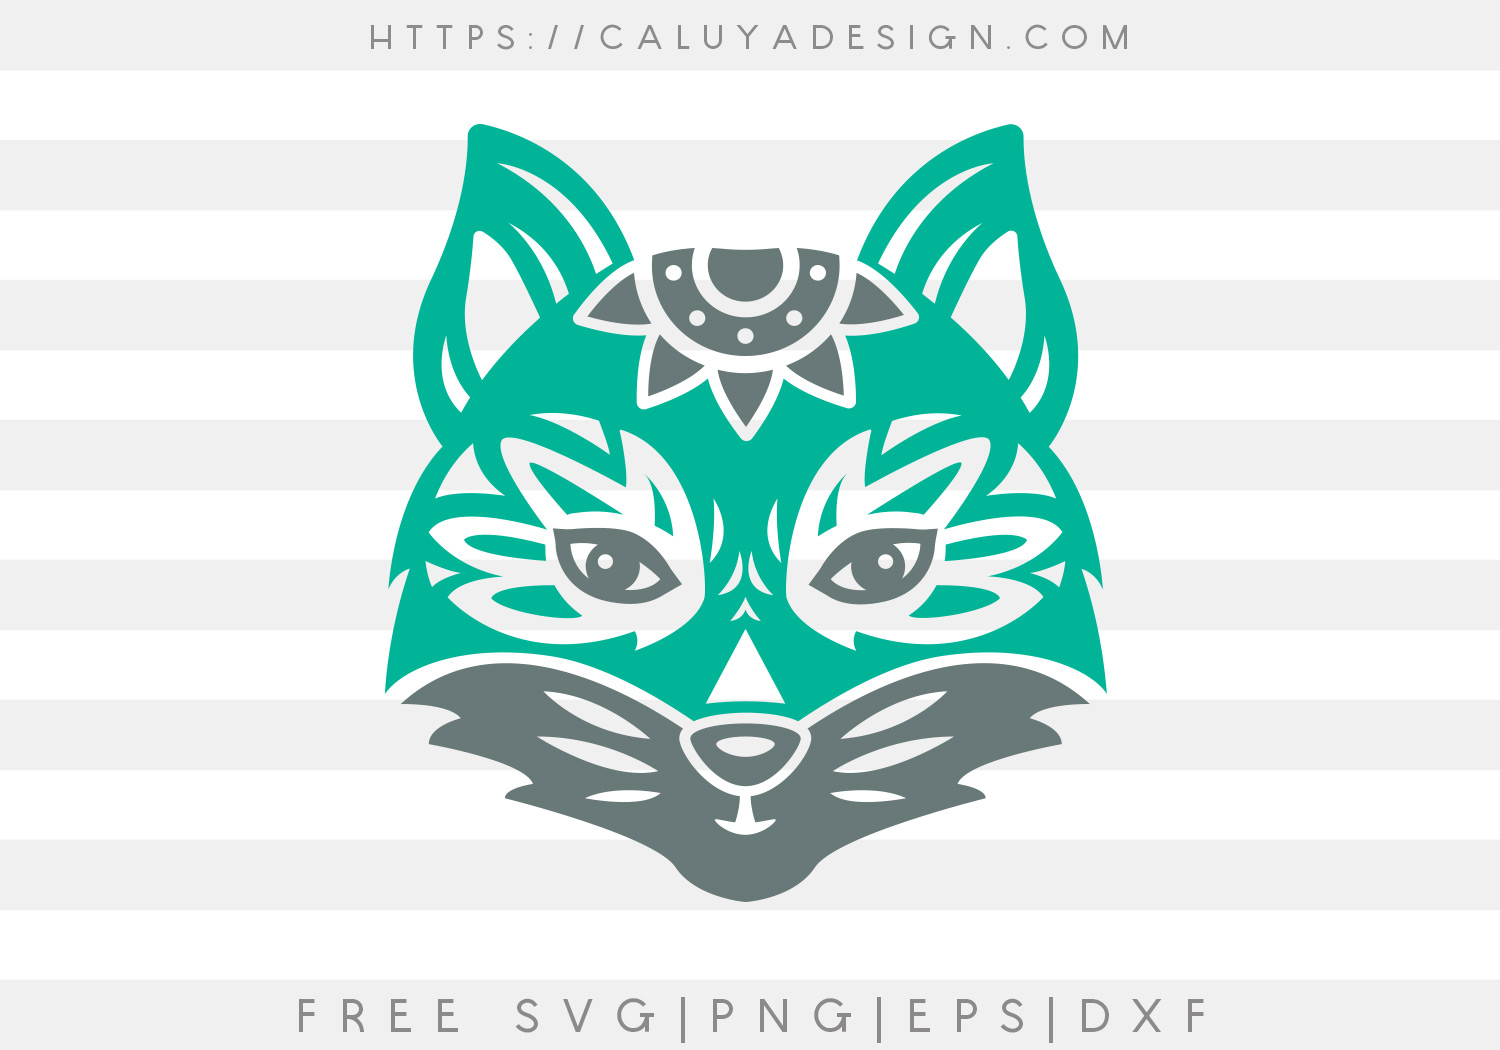 Download Free Png Archives Page 2 Of 6 Caluya Design